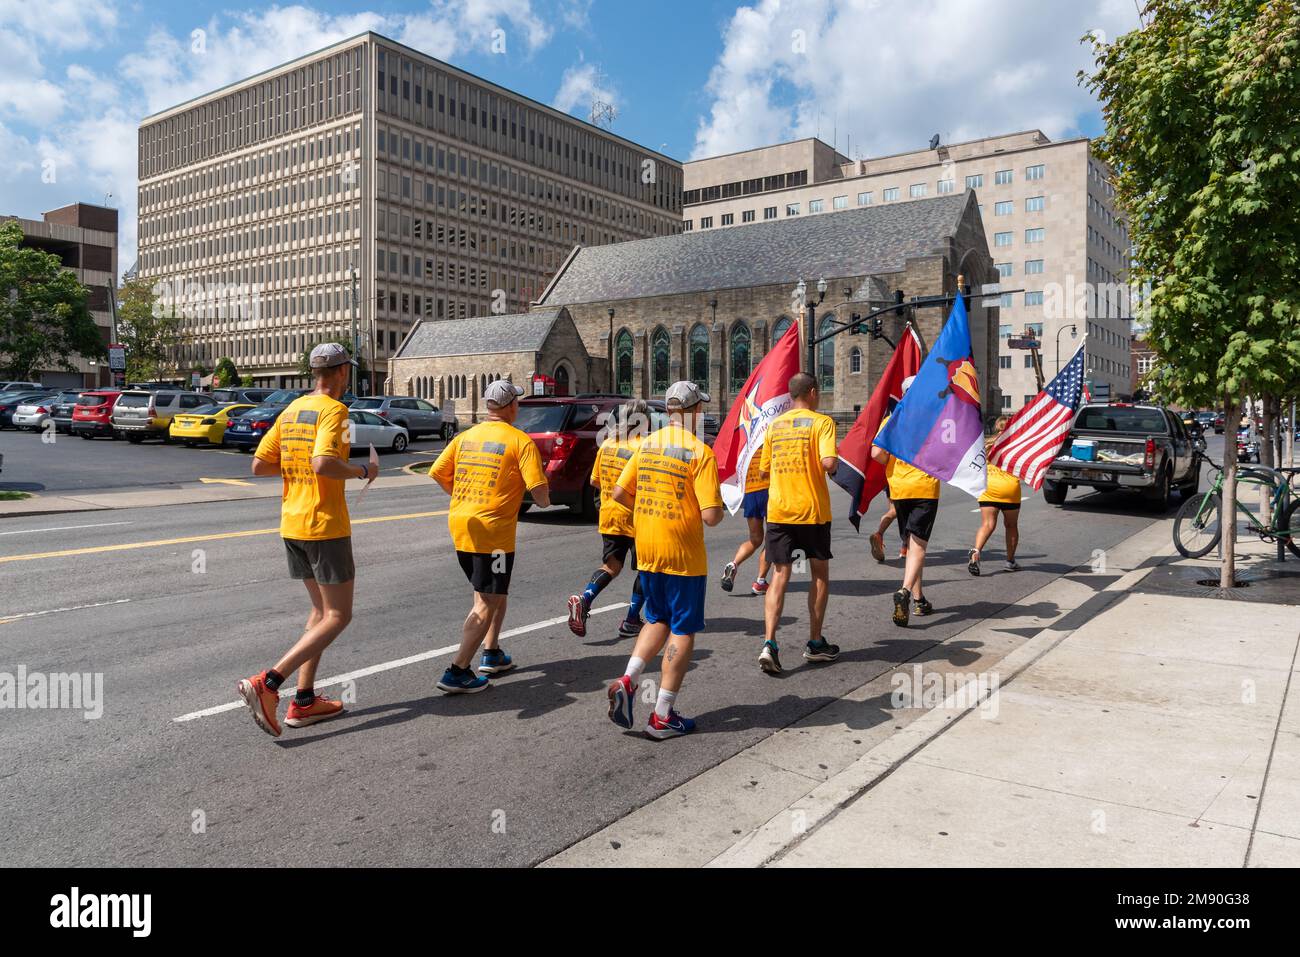 Men and women wearing bright yellow t-shirts in Run for the Fallen run in the streets of downtown Nashville, Tennessee. Stock Photo